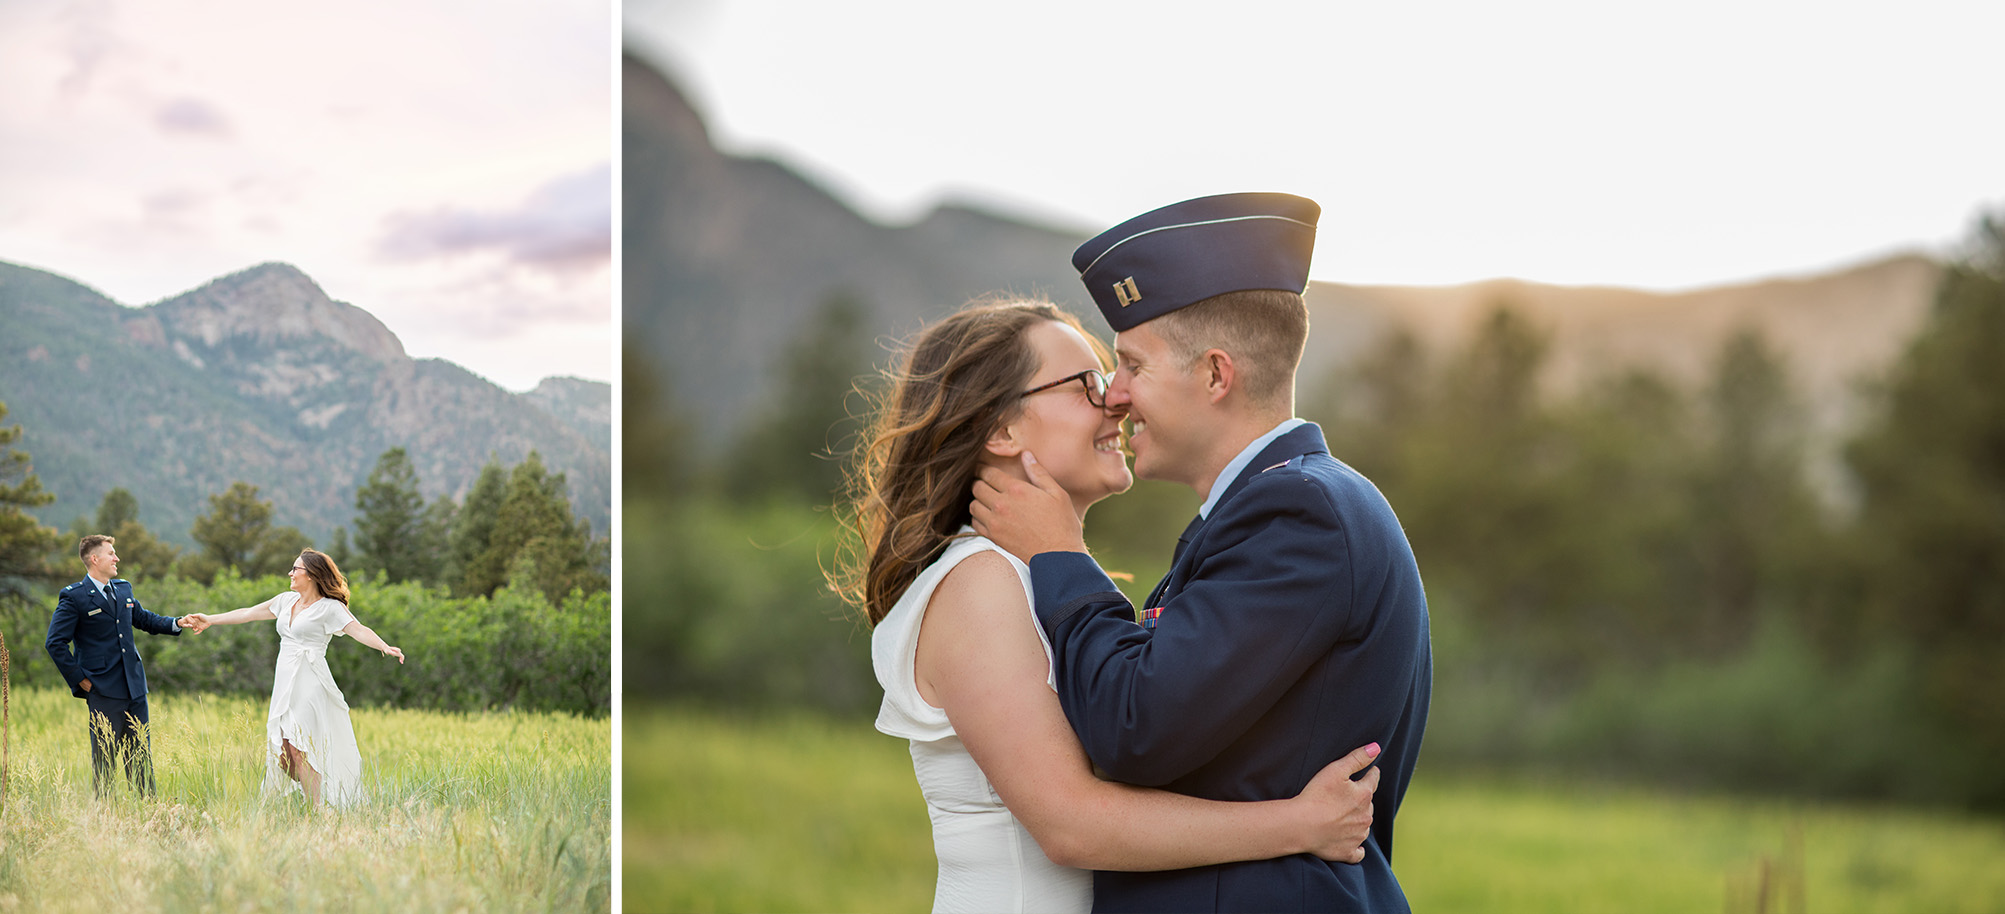 air force engagement session groom takes brides face in hands to kiss